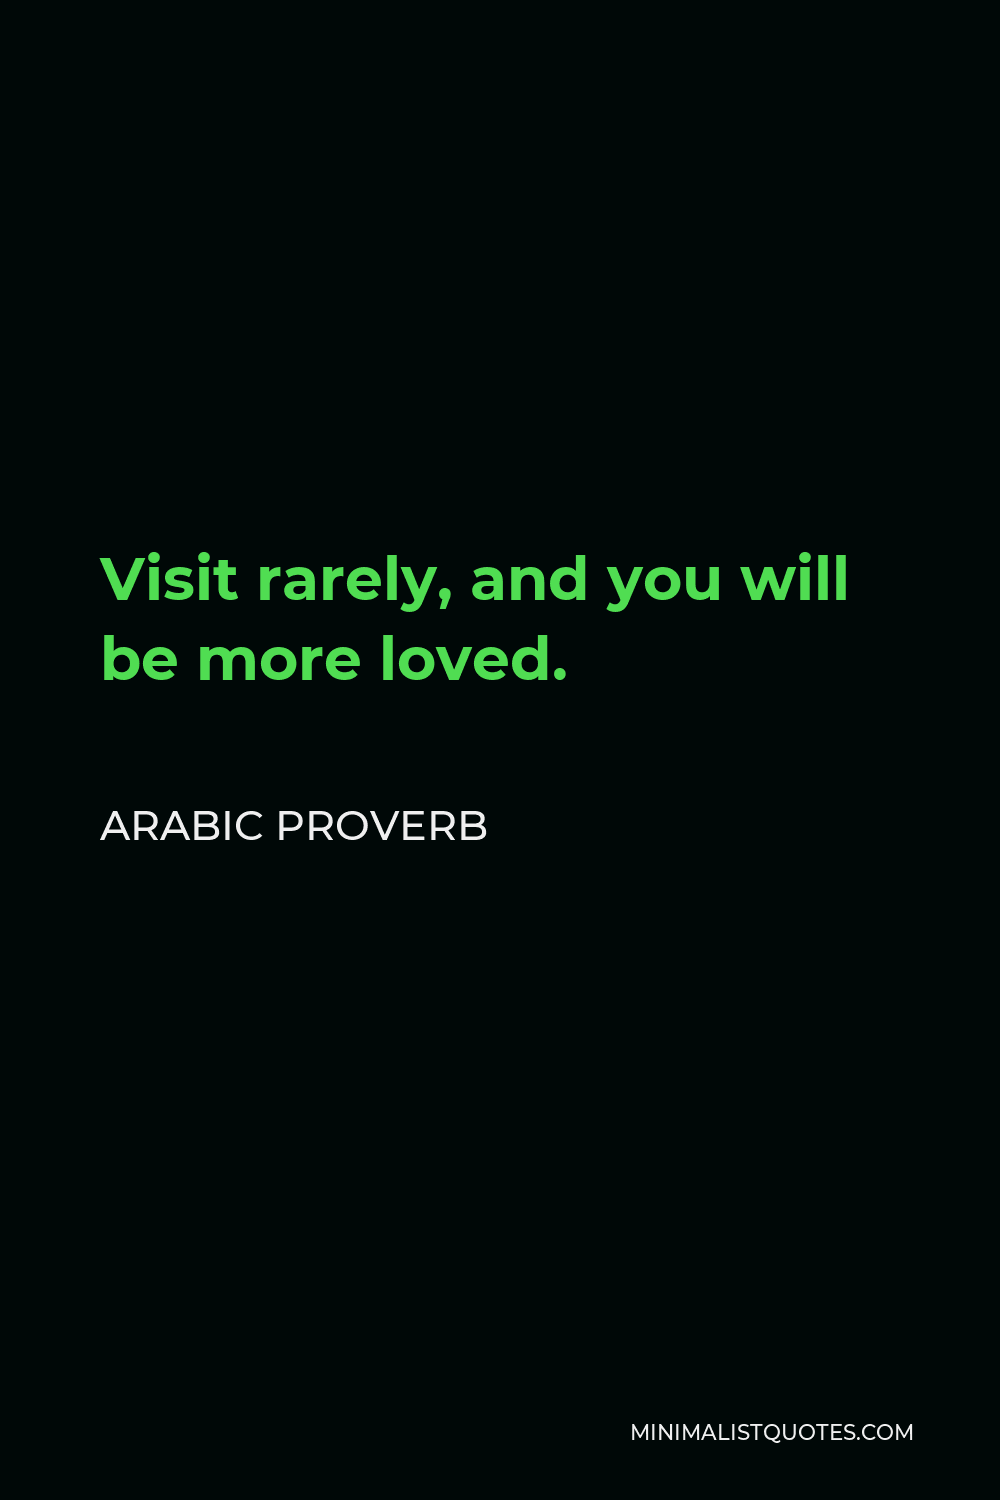 Arabic Proverb Quote - Visit rarely, and you will be more loved.